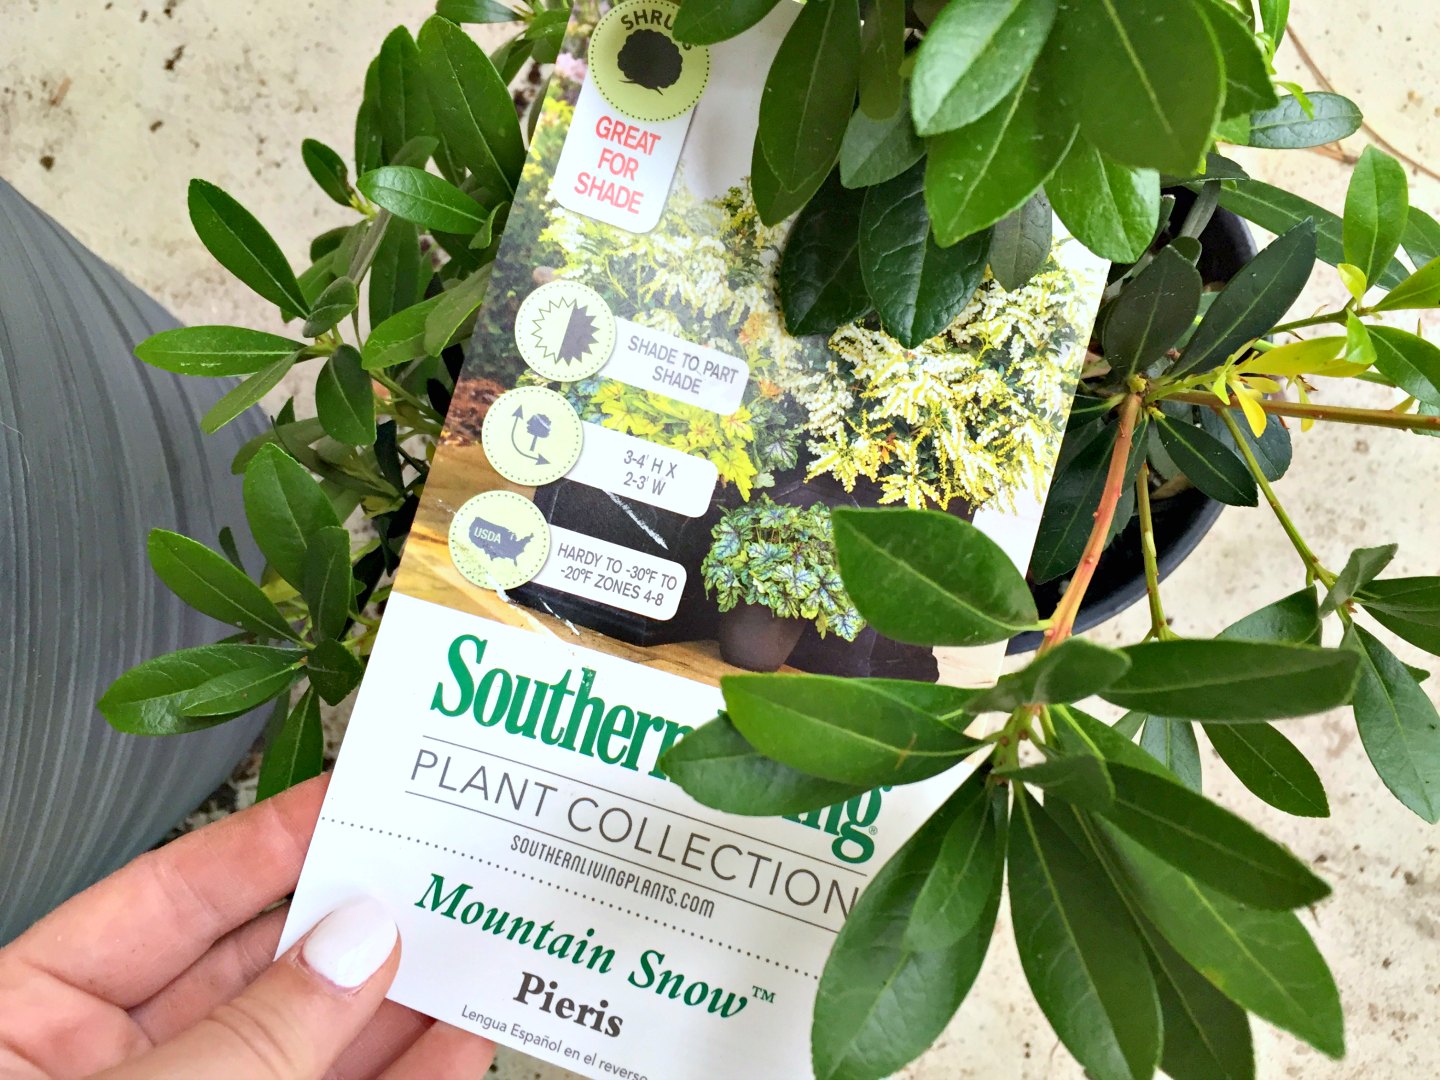 southern living plant collection mountain snow pieris - great for shade containers